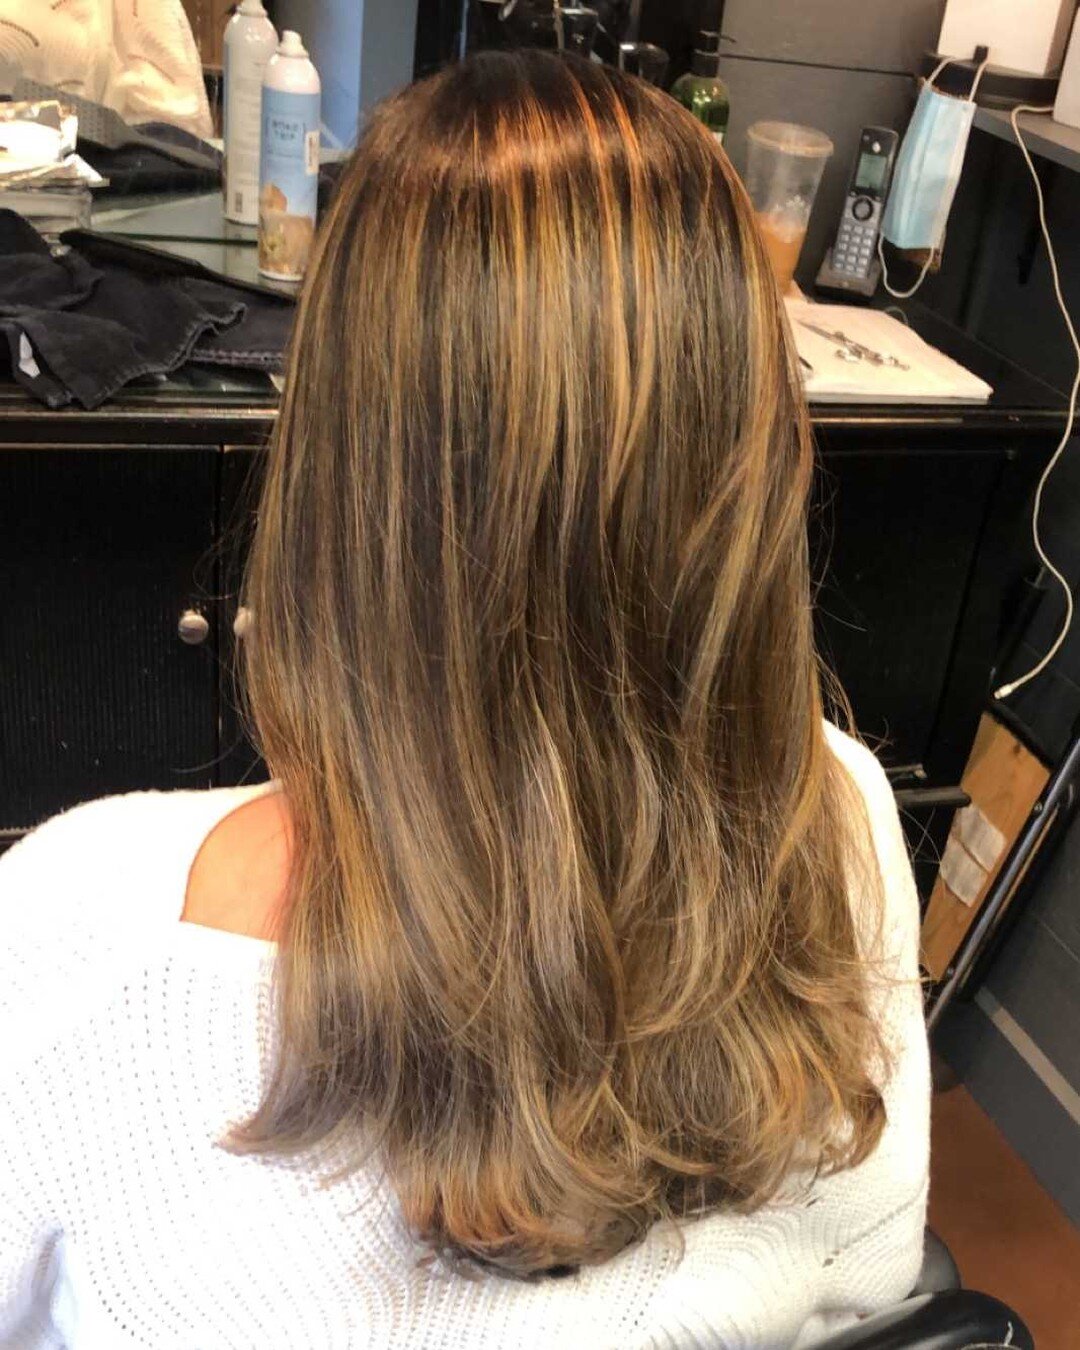 Happy Summer! ☀️ If you haven't made it to the beach yet, you can at least make it look like you have 😆 Time to get those highlights in! 

#Hair #Hairstyle #Hairoftheday #Haircut #Hairstylist #Haircolour #Hairdresser #Hairfashion #Hairup #Hairideas 